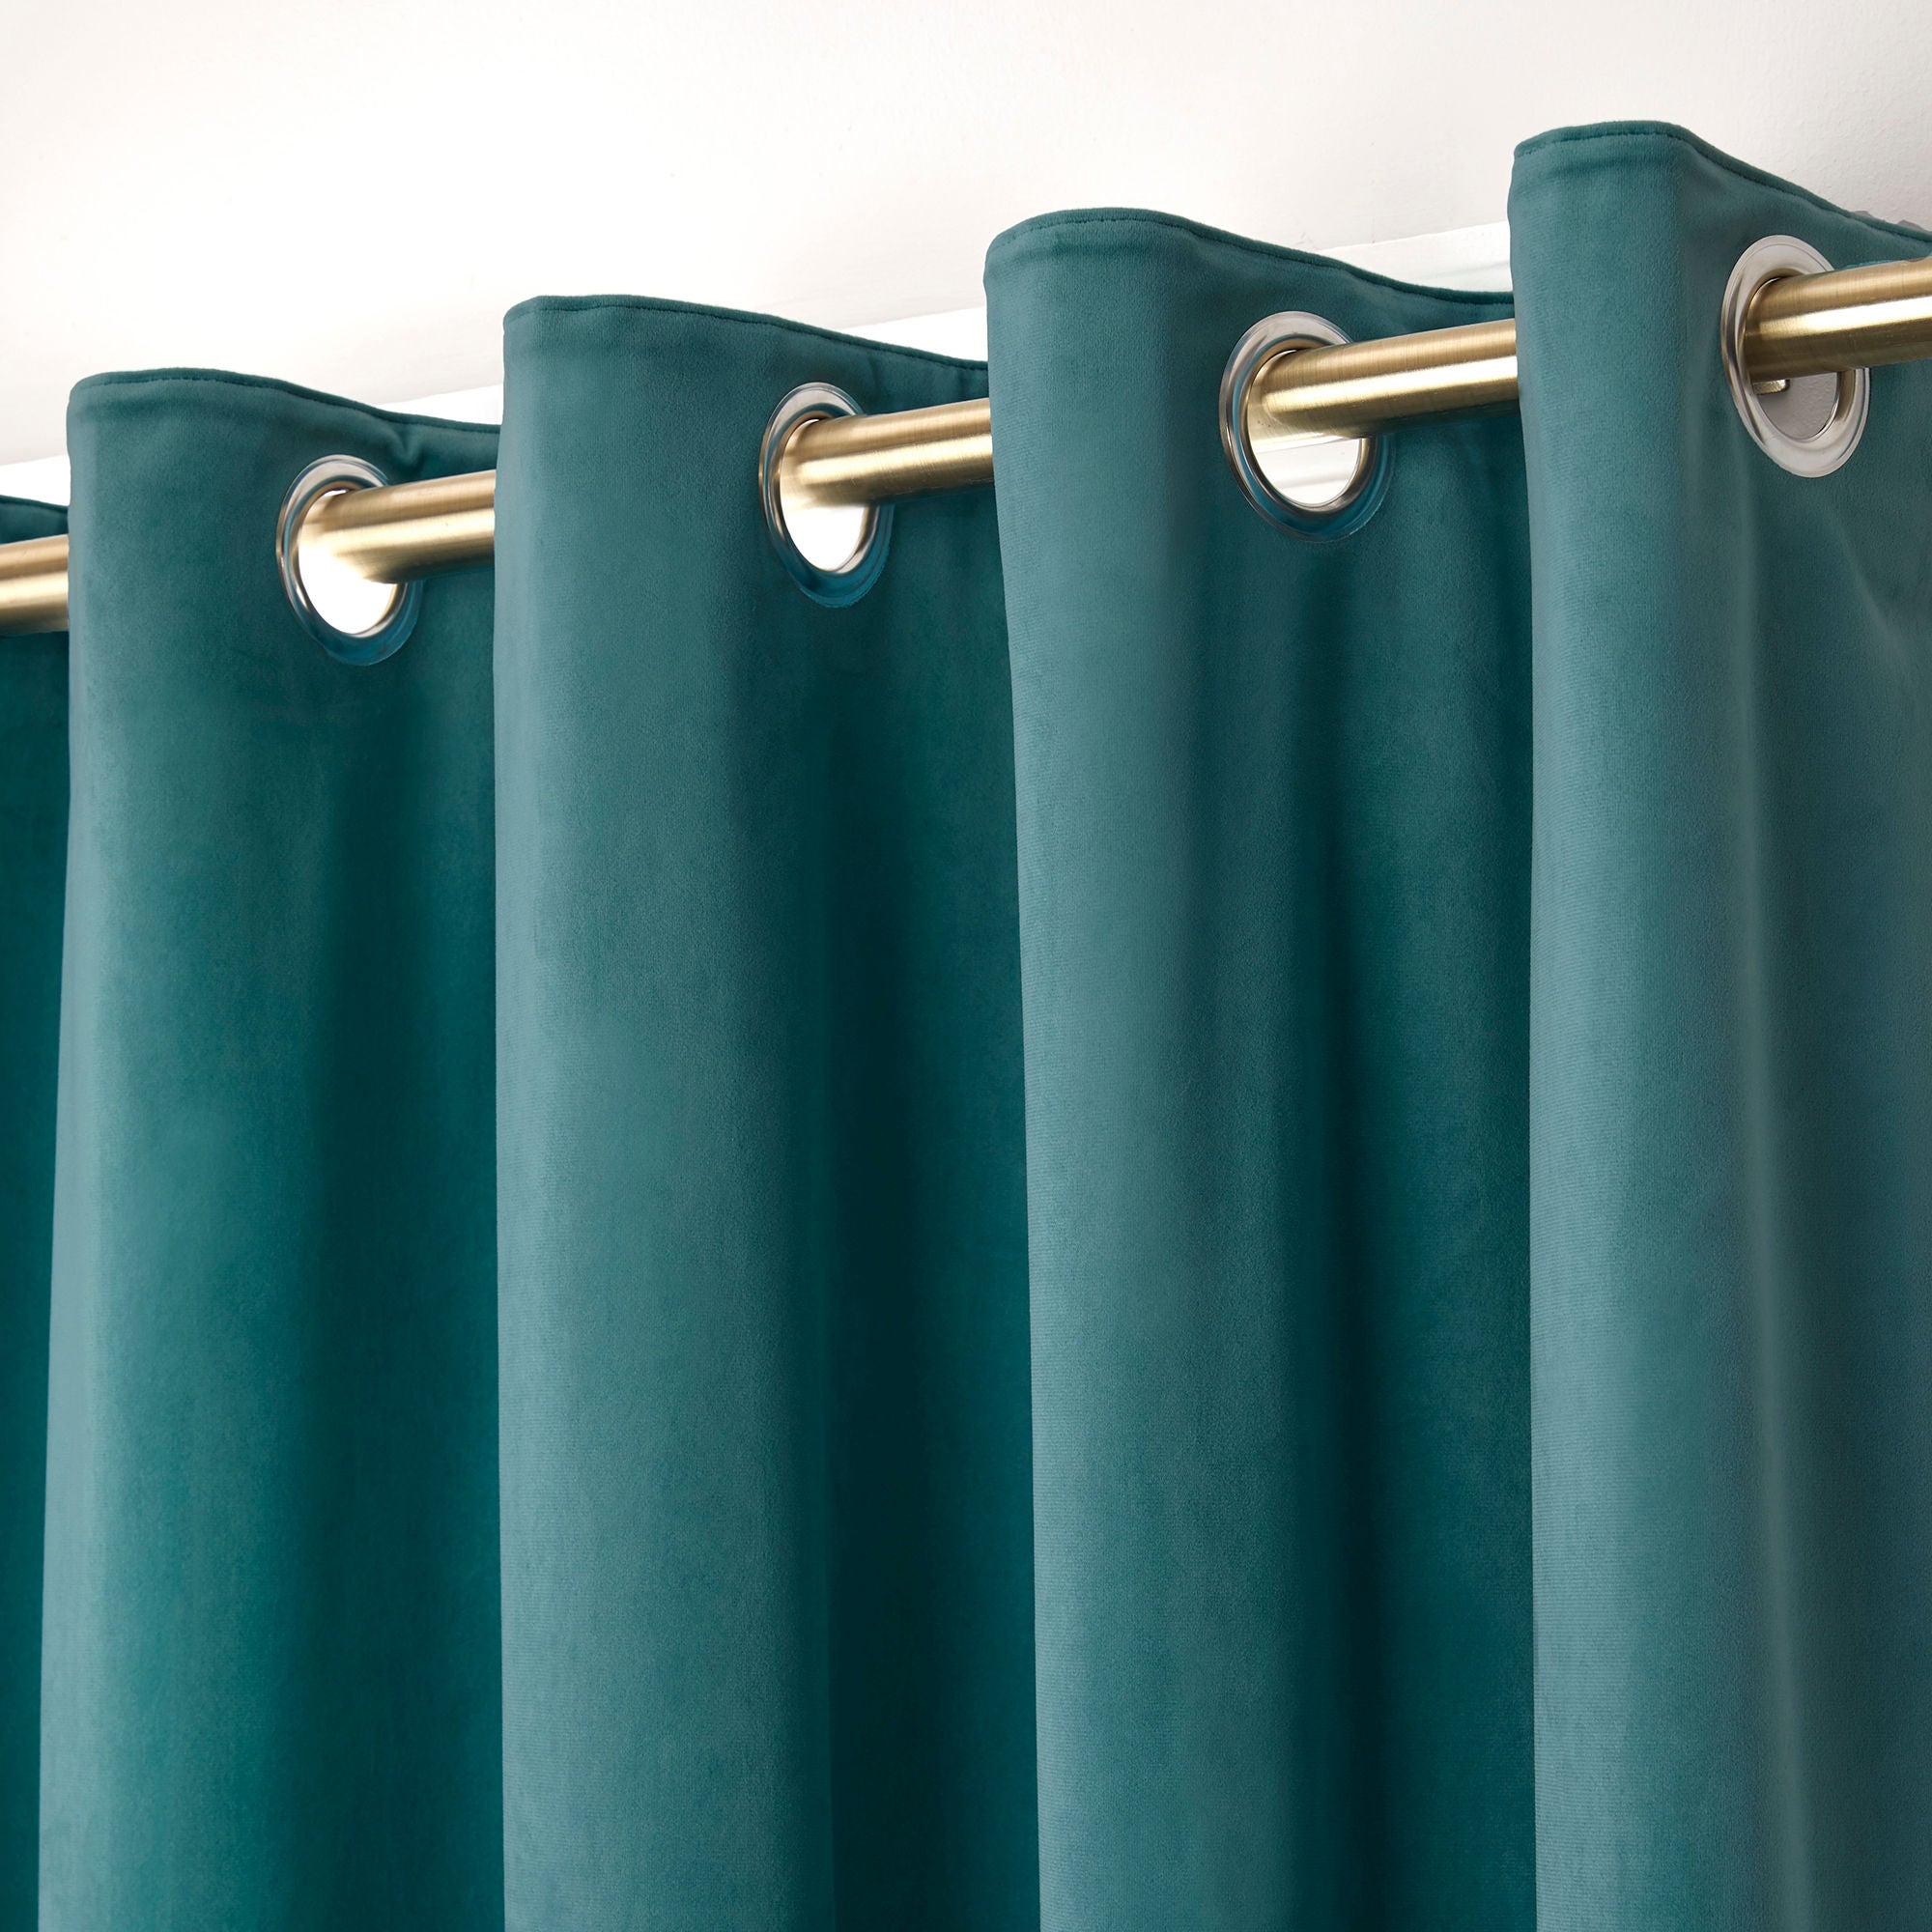 Montrose Pair of Eyelet Curtains by Laurence Llewelyn-Bowen in Teal - Pair of Eyelet Curtains - Laurence Llewelyn-Bowen